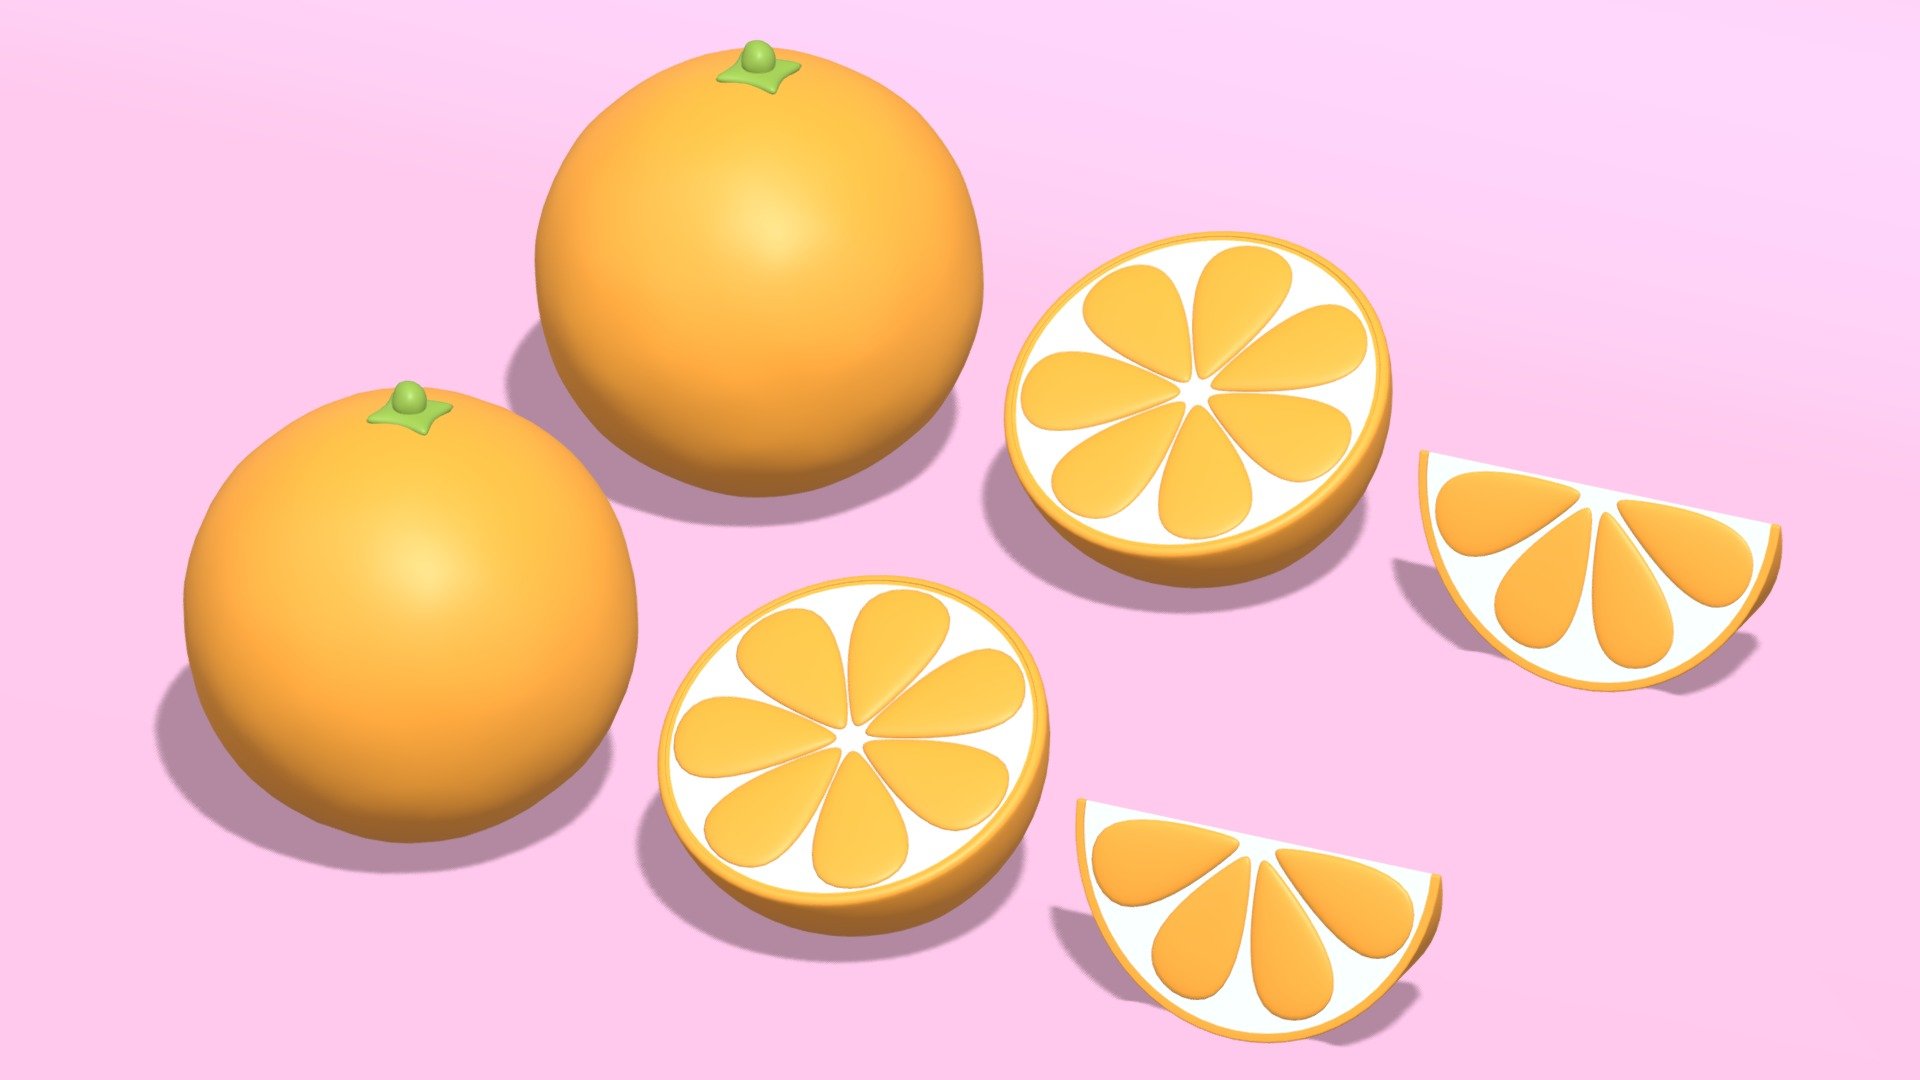 -Low Poly Cartoon Orange.

-This product contains 3 objects.

-Total vert: 484, poly: 544.

-Materials and objects have the correct names.

-This product was created in Blender 2.935.

-Formats: blend, fbx, obj, c4d, dae, abc, stl, glb, unity.

-We hope you enjoy this model.

-Thank you 3d model